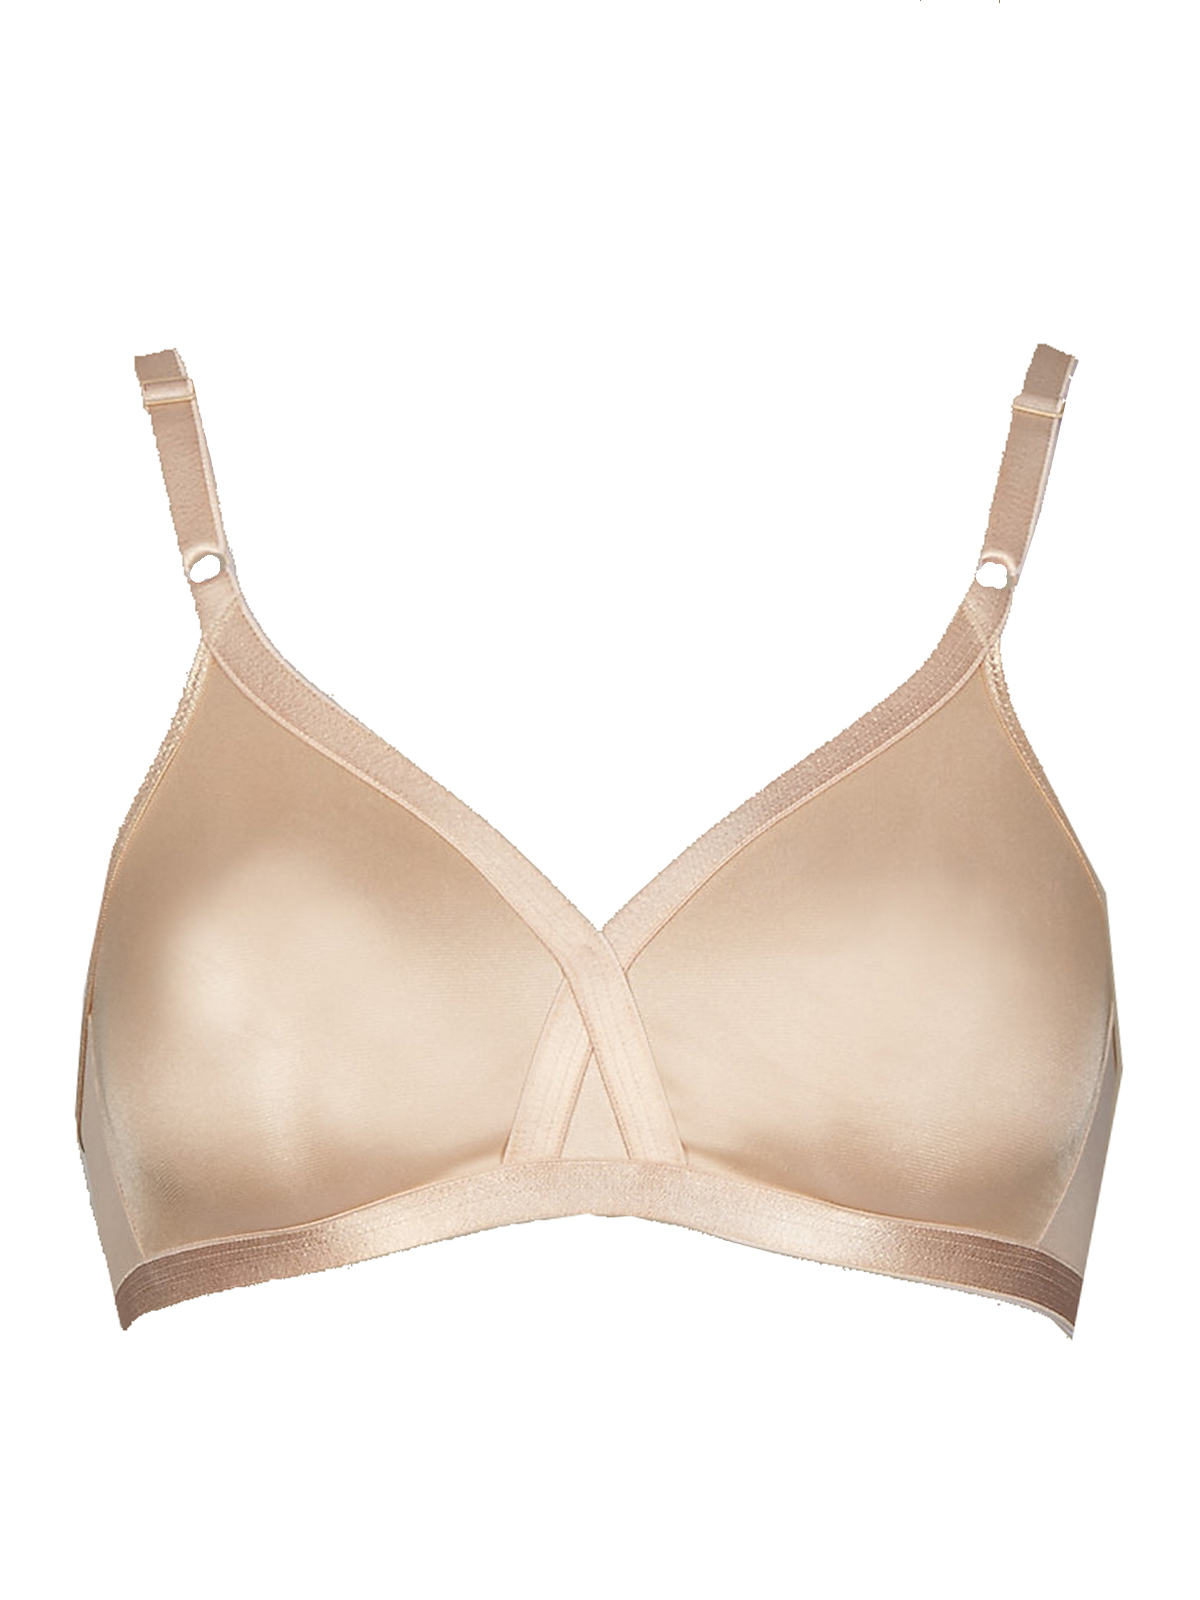 Marks and Spencer - - M&5 ALMOND Non-Wired Crossover Full Cup Bra ...